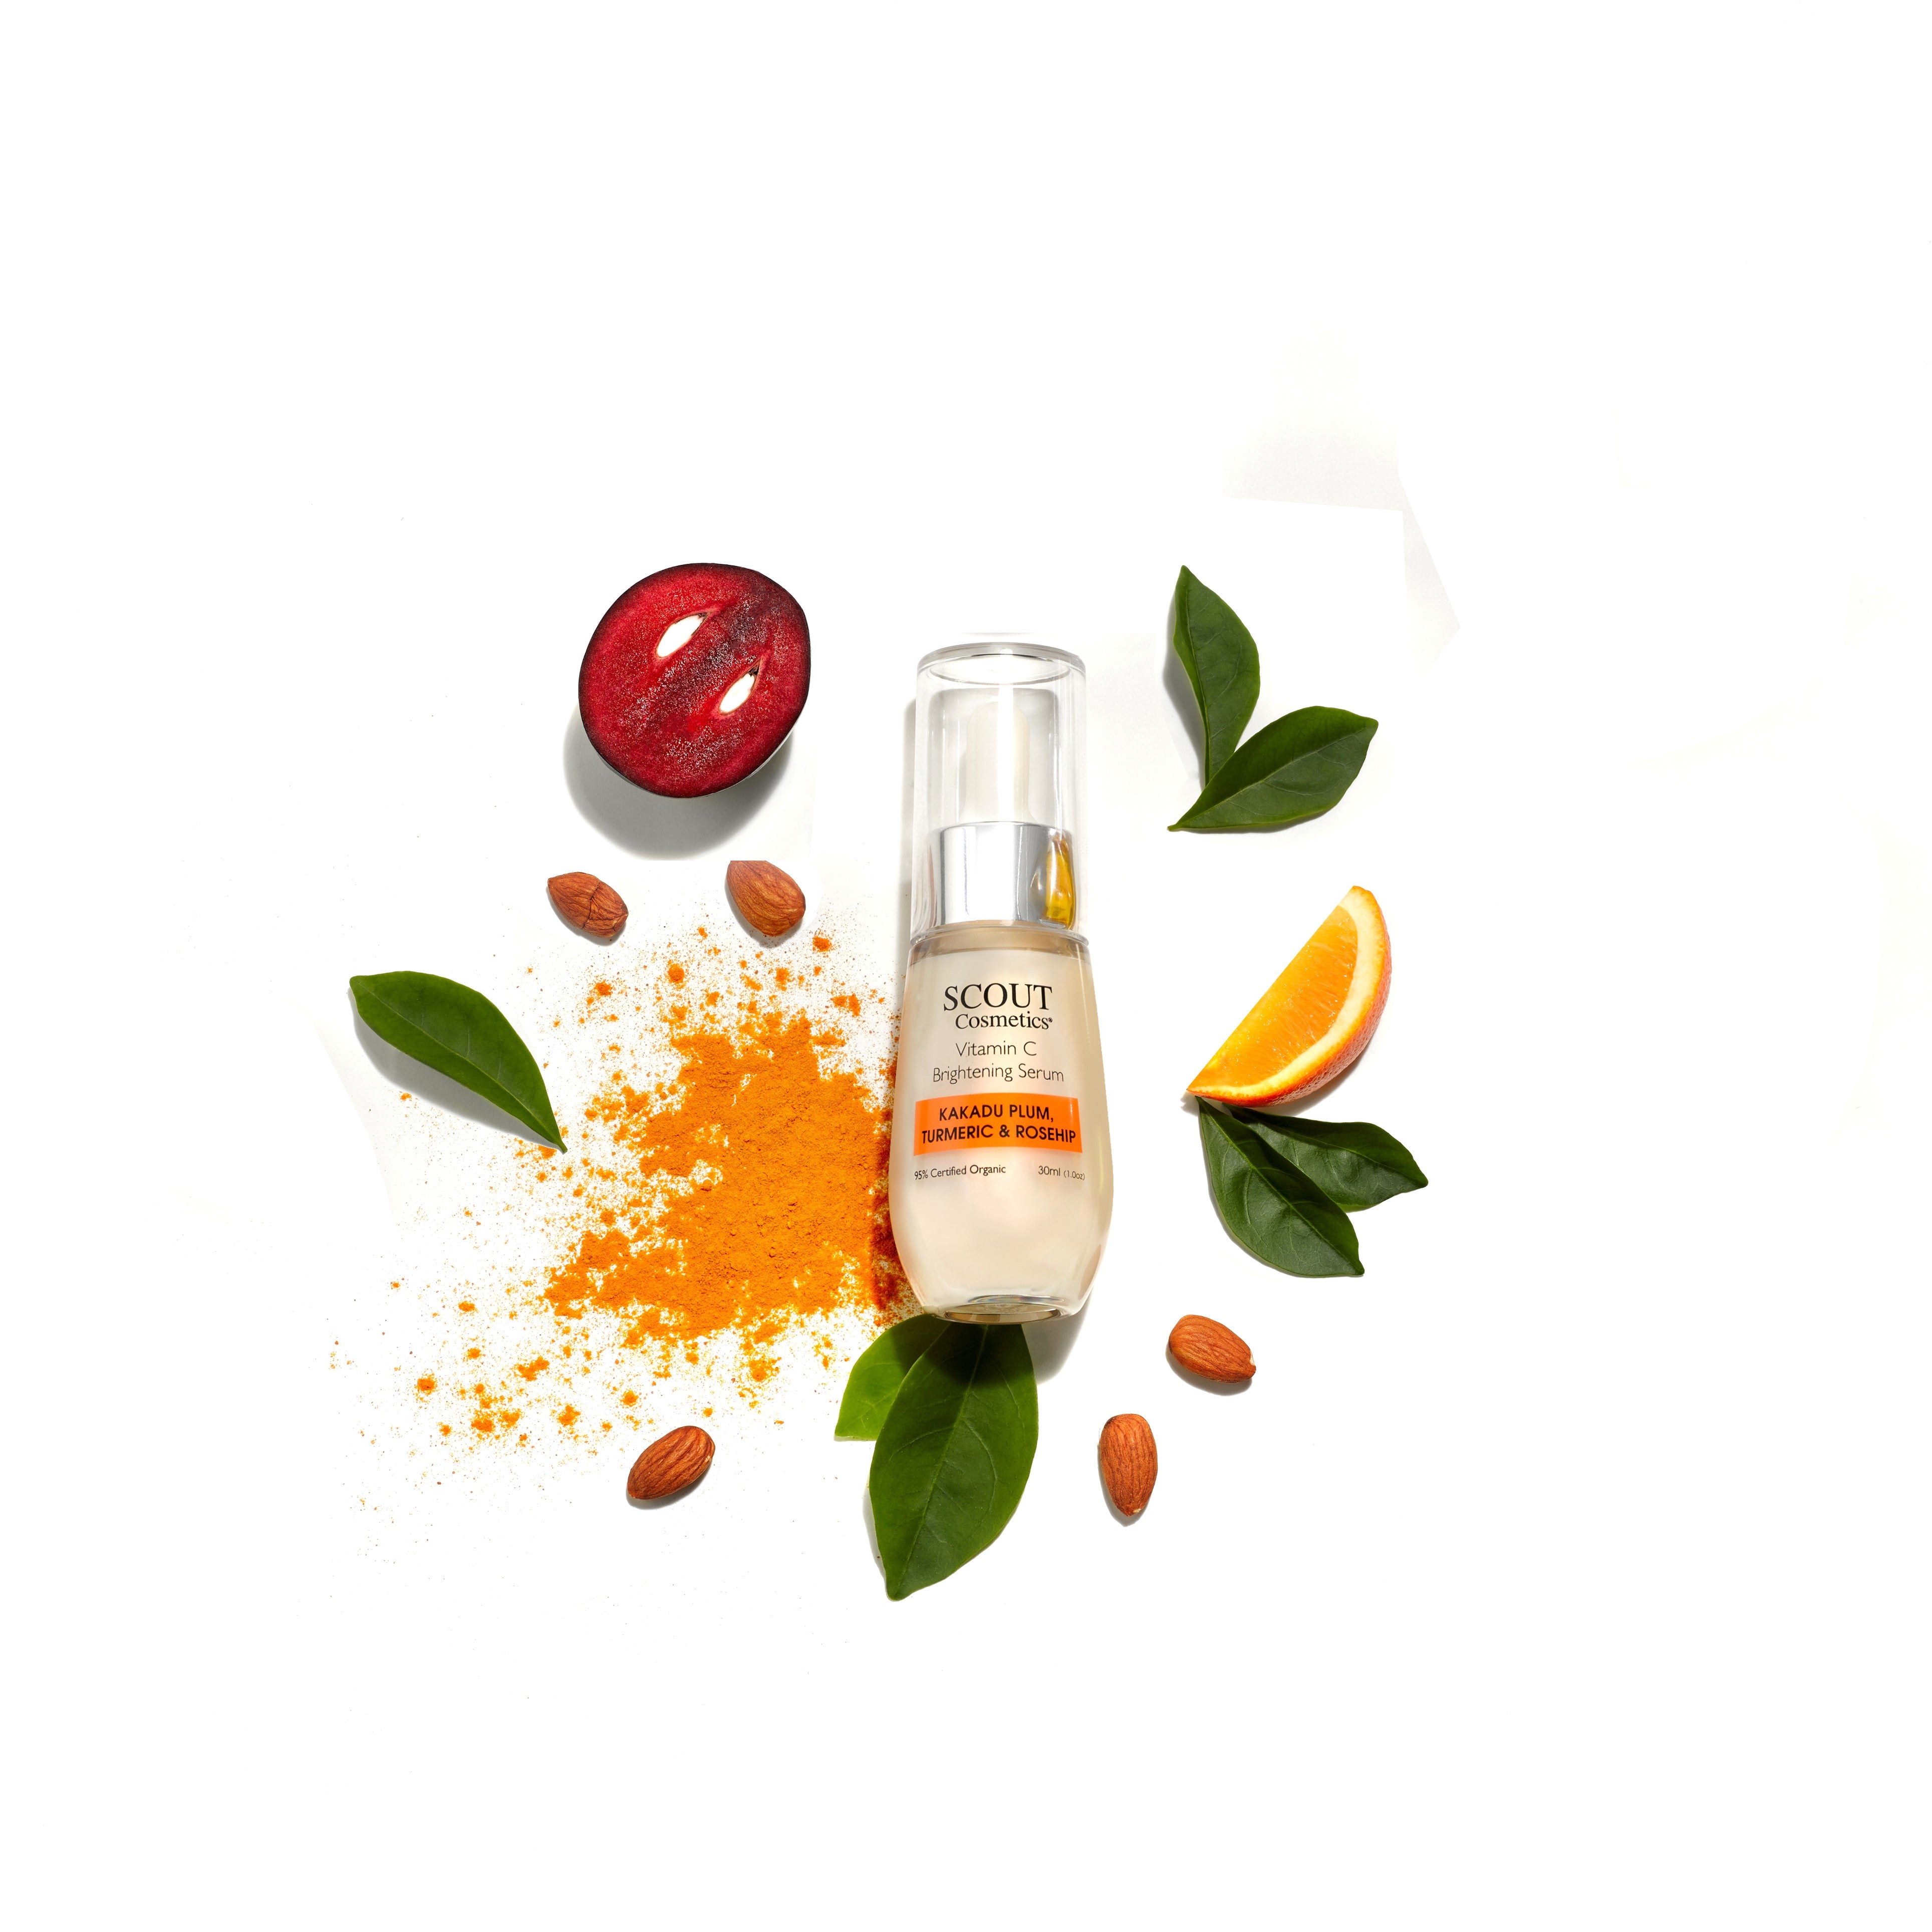 SCOUT Organic Active Beauty - The Secret to Glowing Healthy Skin - Vitamin C Serum 